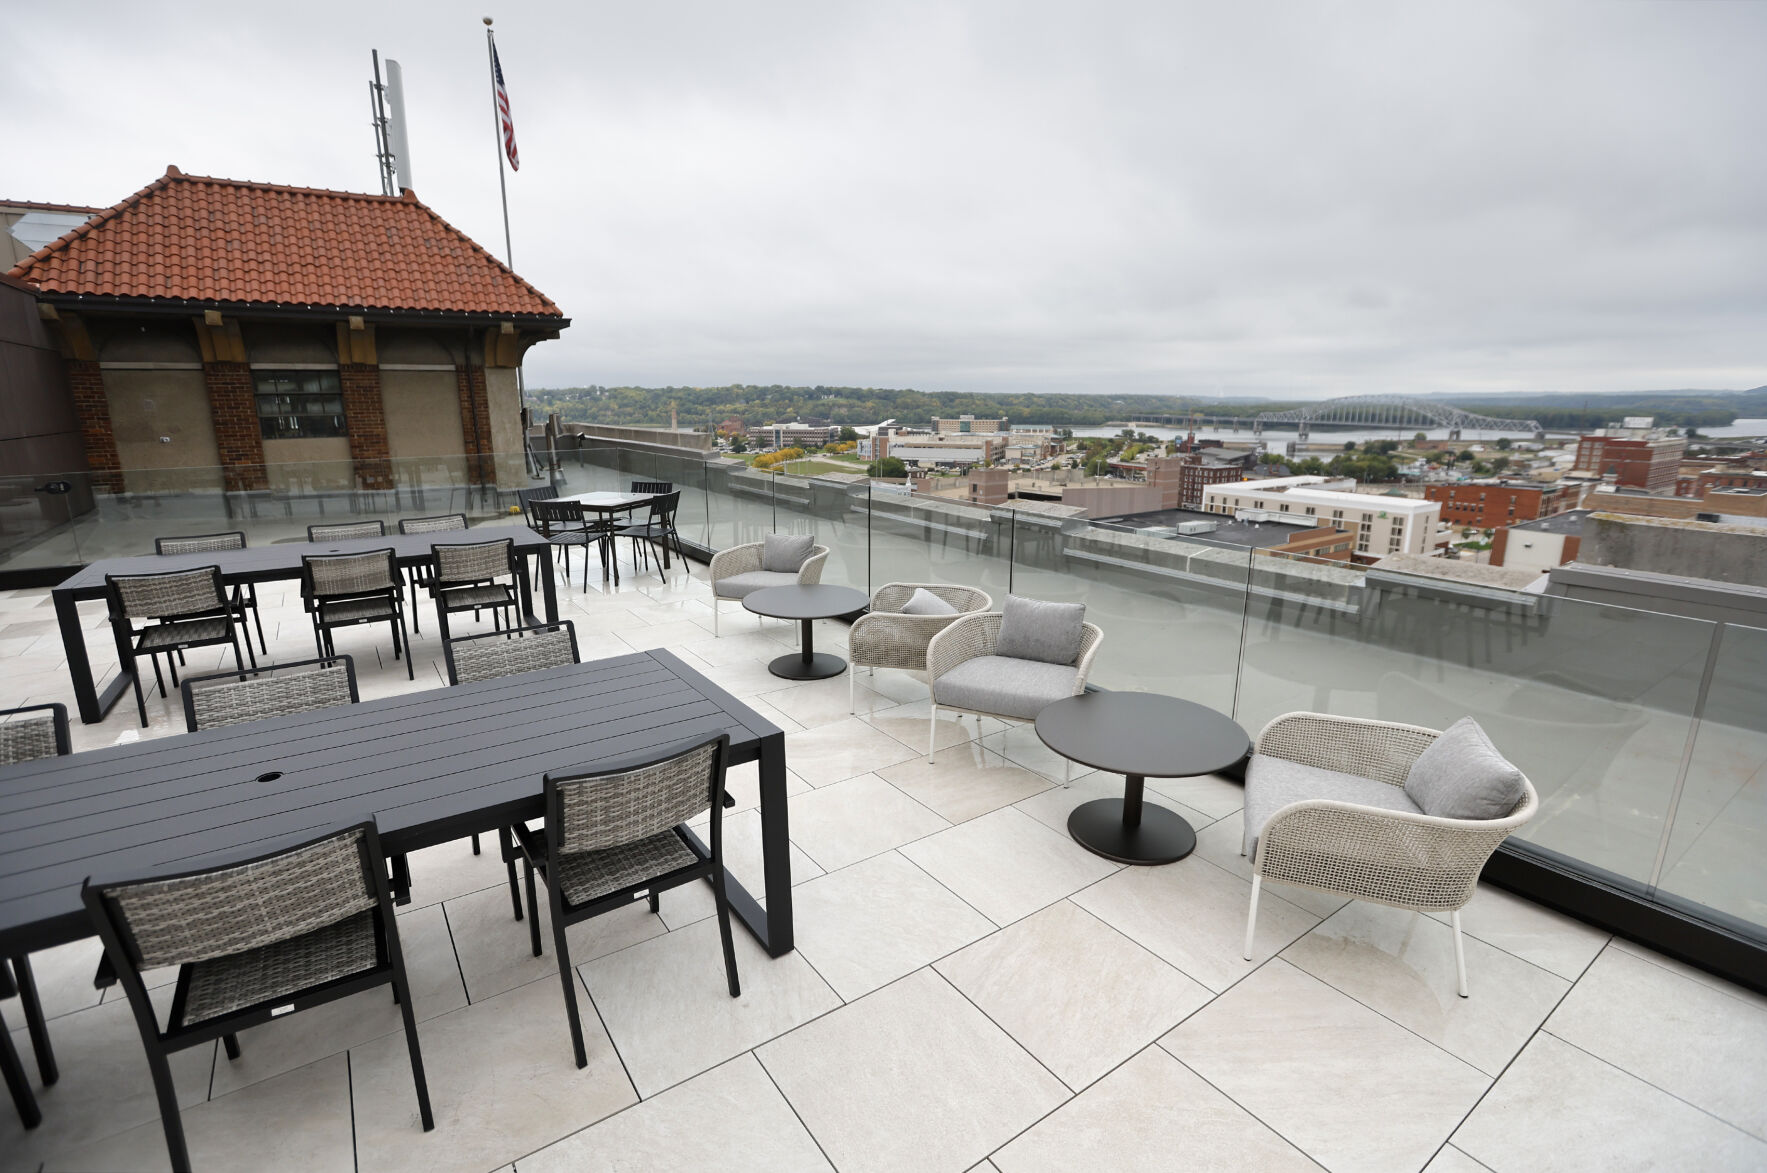 An outdoor space shared by Cottingham & Butler and HTLF at the Roshek Building in Dubuque on Tuesday, Sept. 26, 2023.    PHOTO CREDIT: JESSICA REILLY